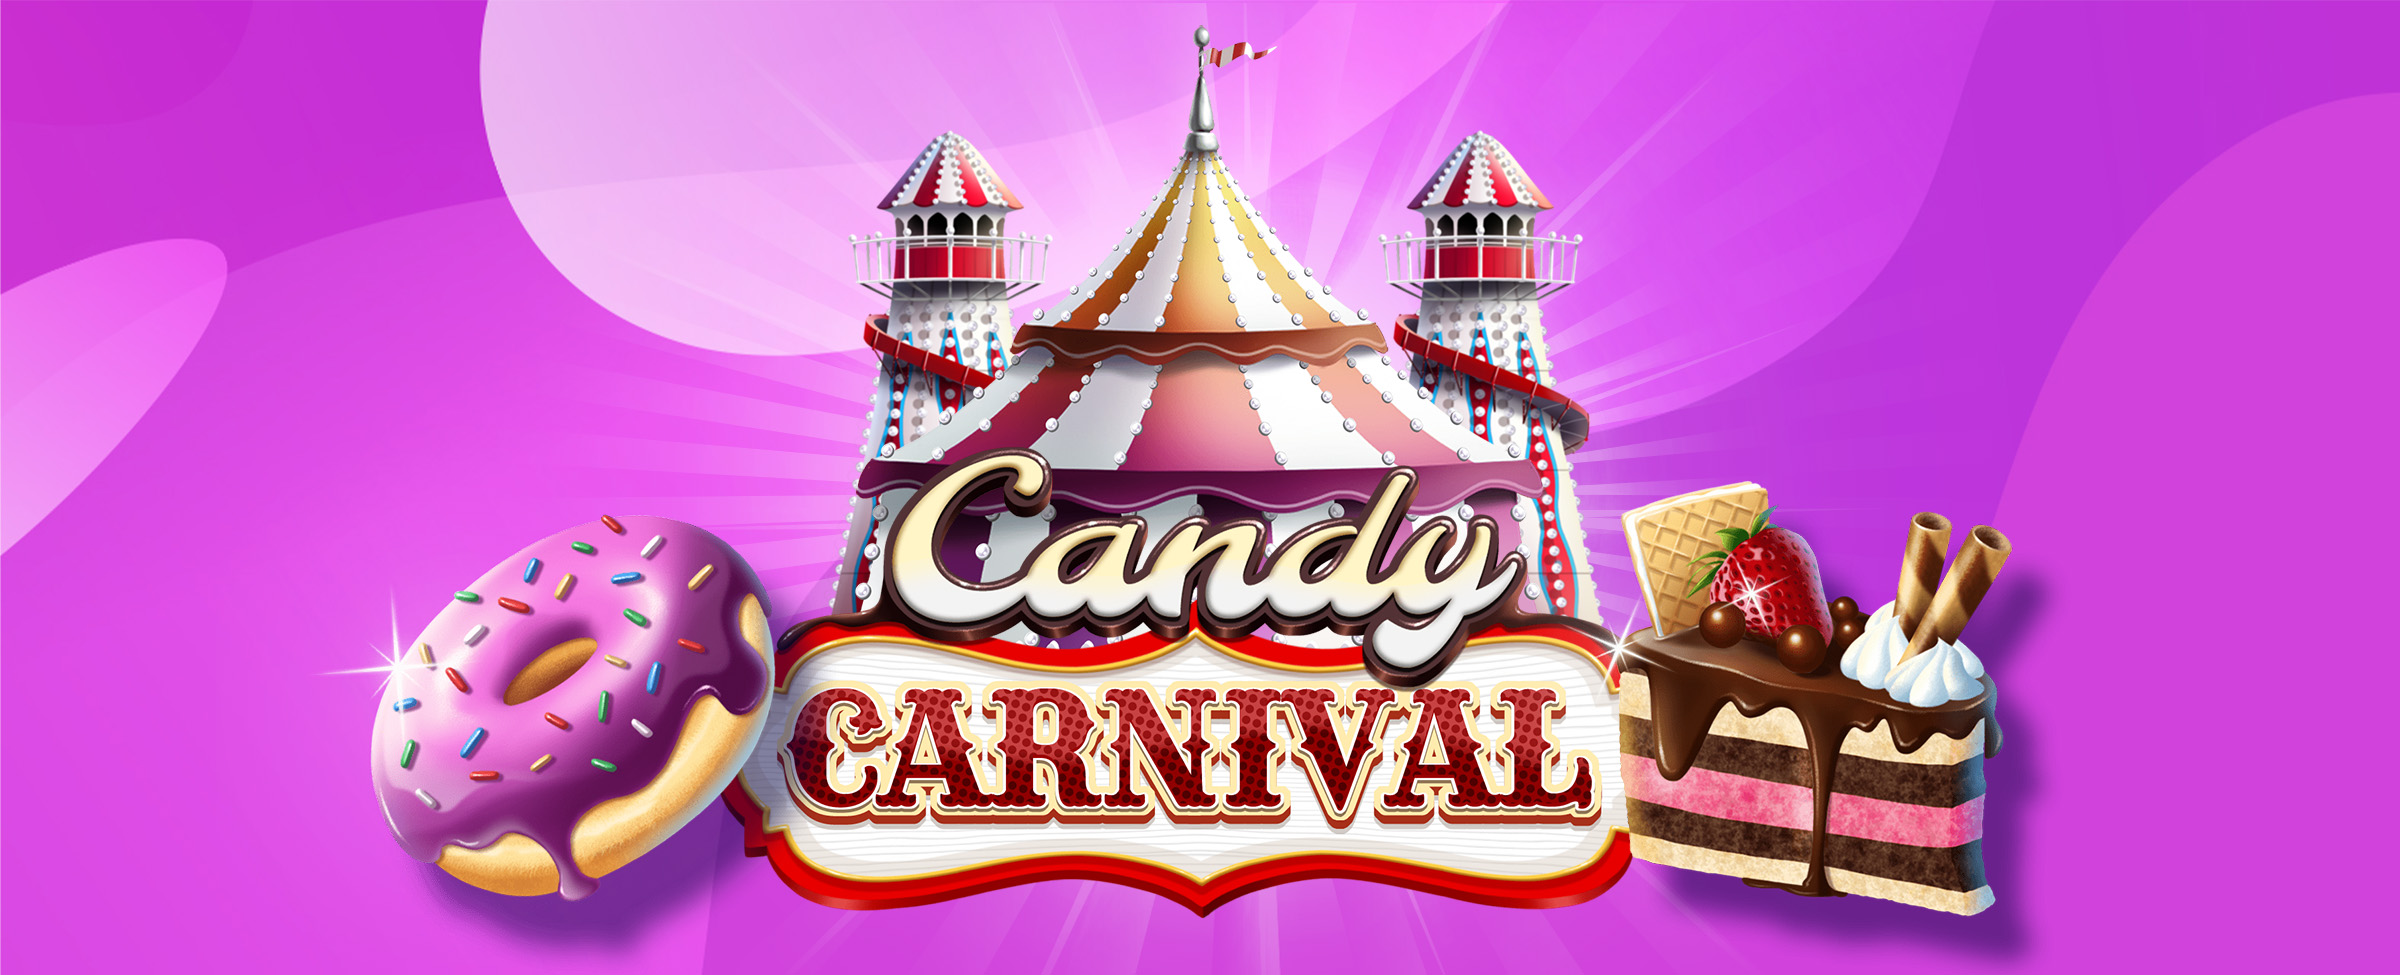 This image showcases the 3D logo for the SlotsLV slots game 'Candy Carnival', with 'Candy' in a fun, bubbly script font and 'Carnival' in a red-bordered carnival-style sign. The logo is set against a red and white circus tent with flanking turret towers. A giant glazed donut with purple icing is on the left, and a layered chocolate-strawberry cake with toppings on the right. All set against a backdrop of varying shades of purple.